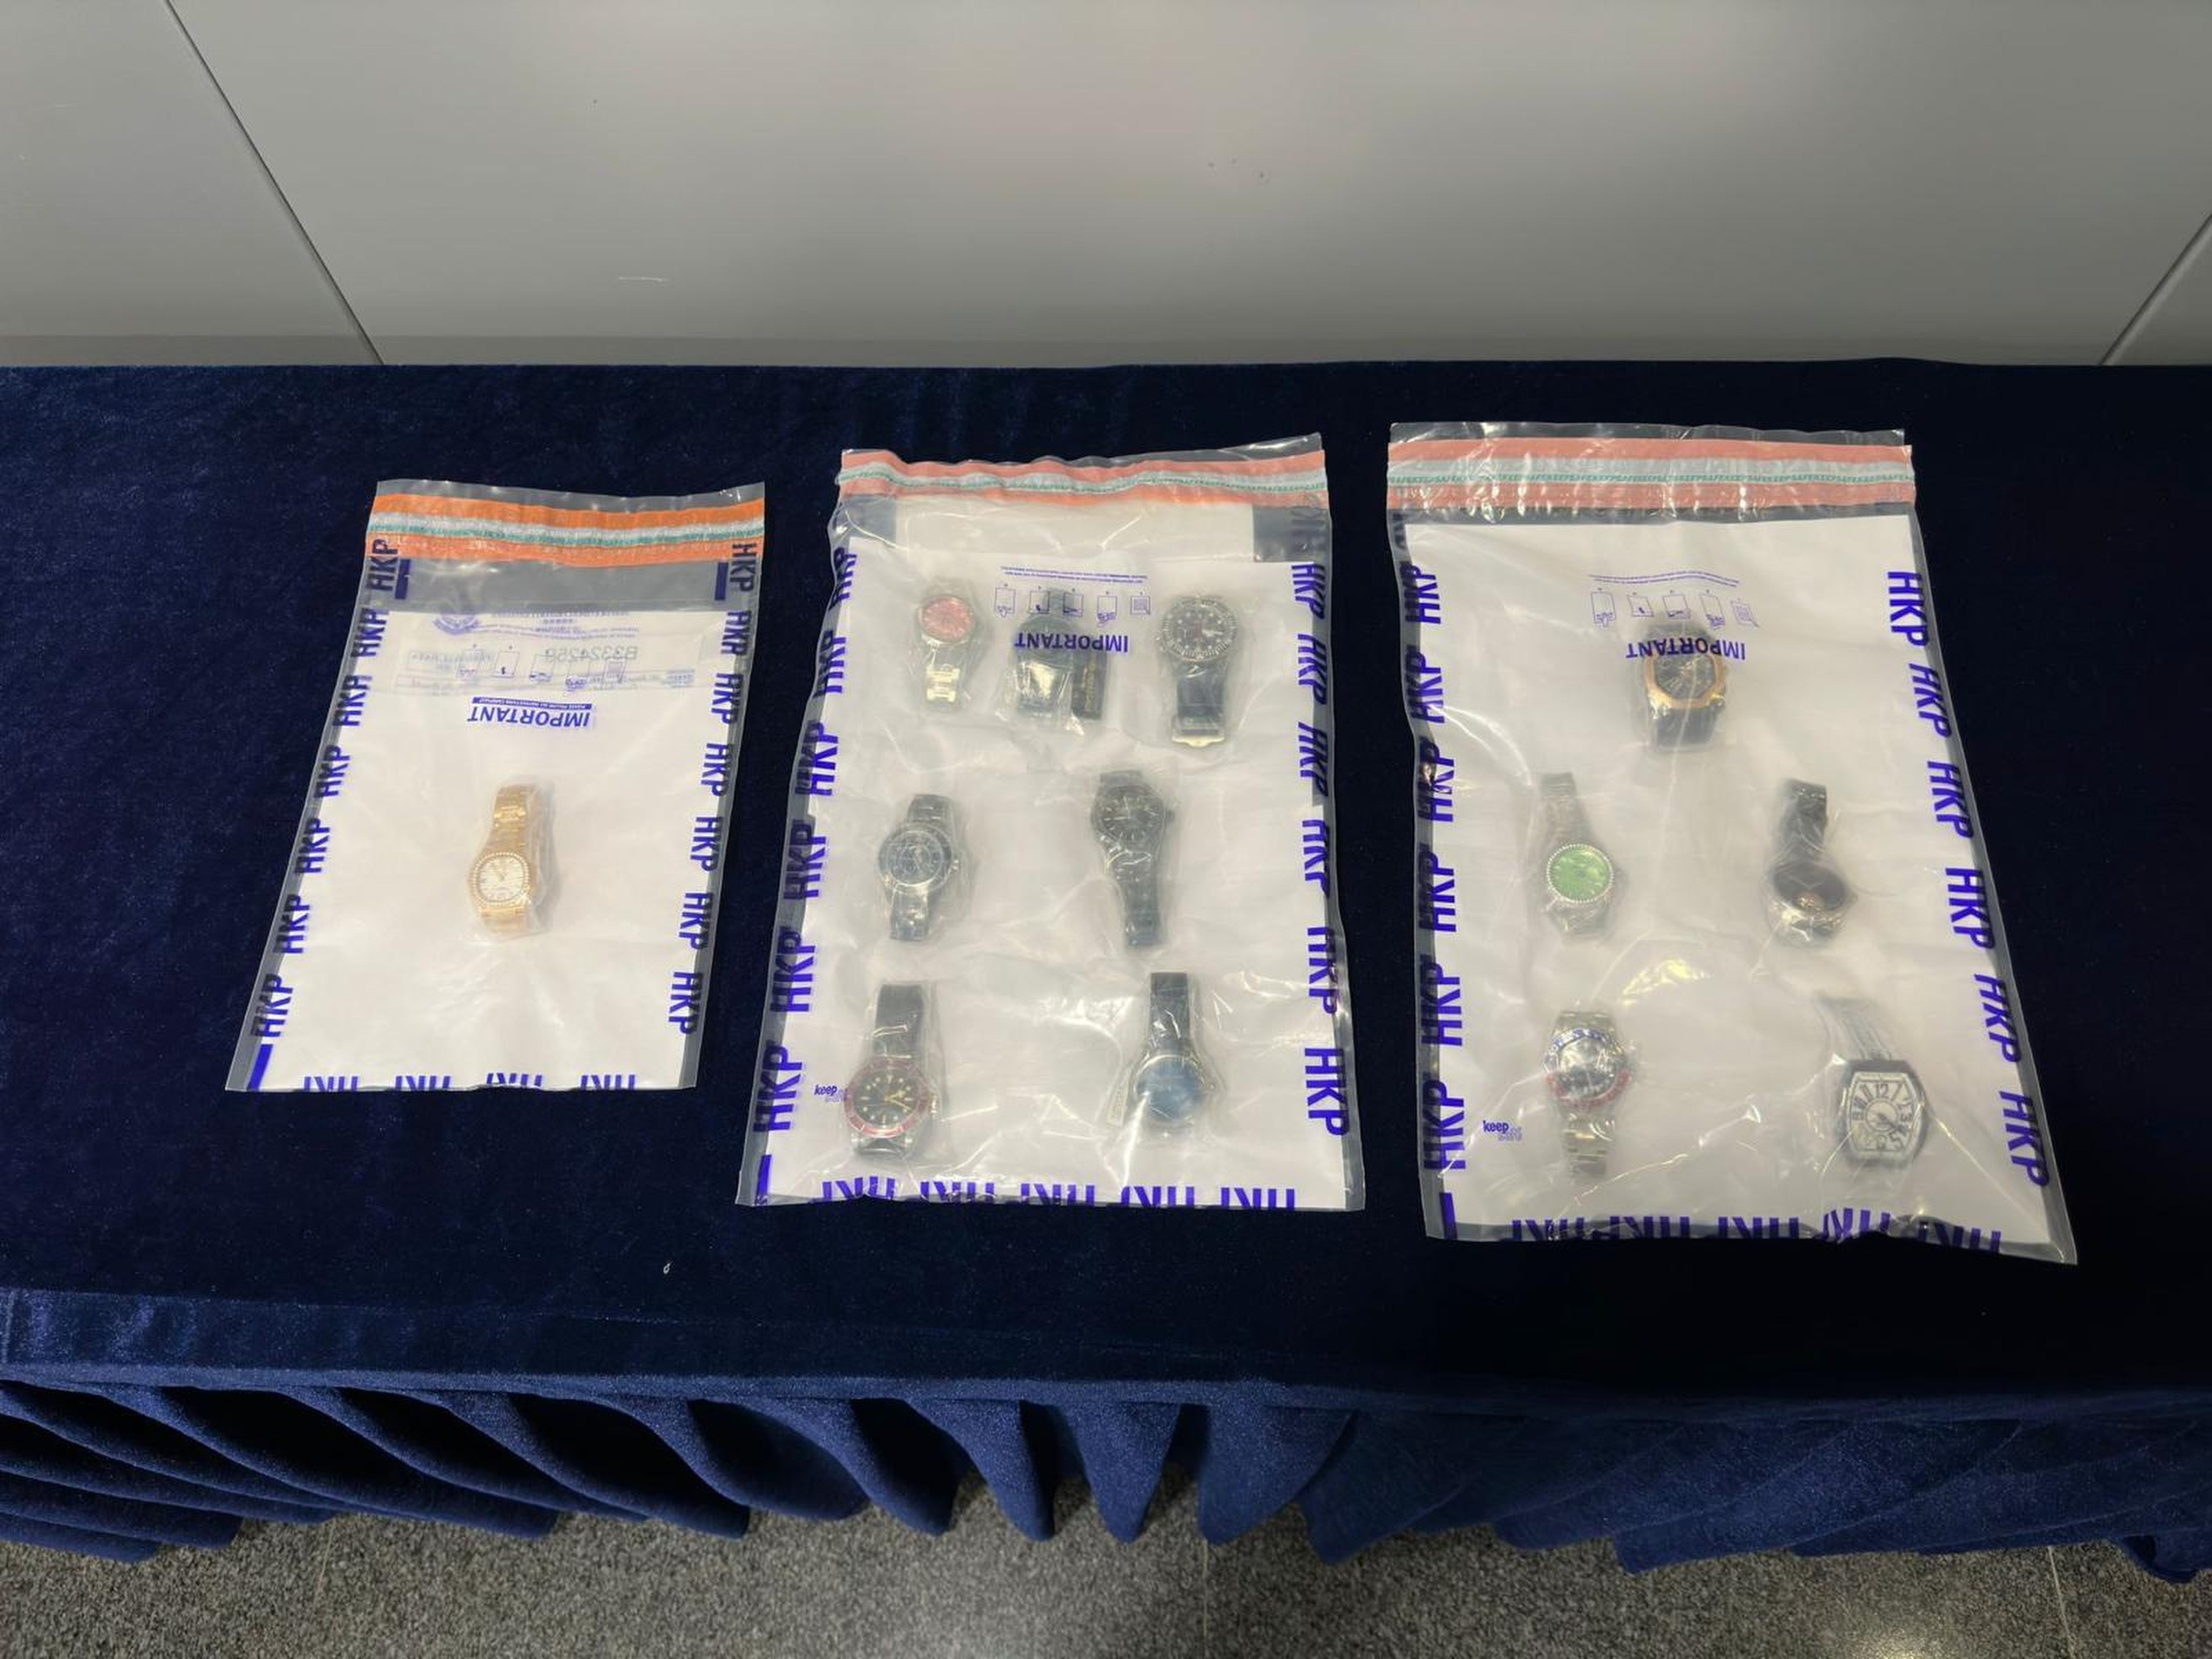 Watches alleged to have been stolen in a HK$6.1 million smash-and-grab raid on an upmarket watch store in Causeway Bay last month. Photo: Handout